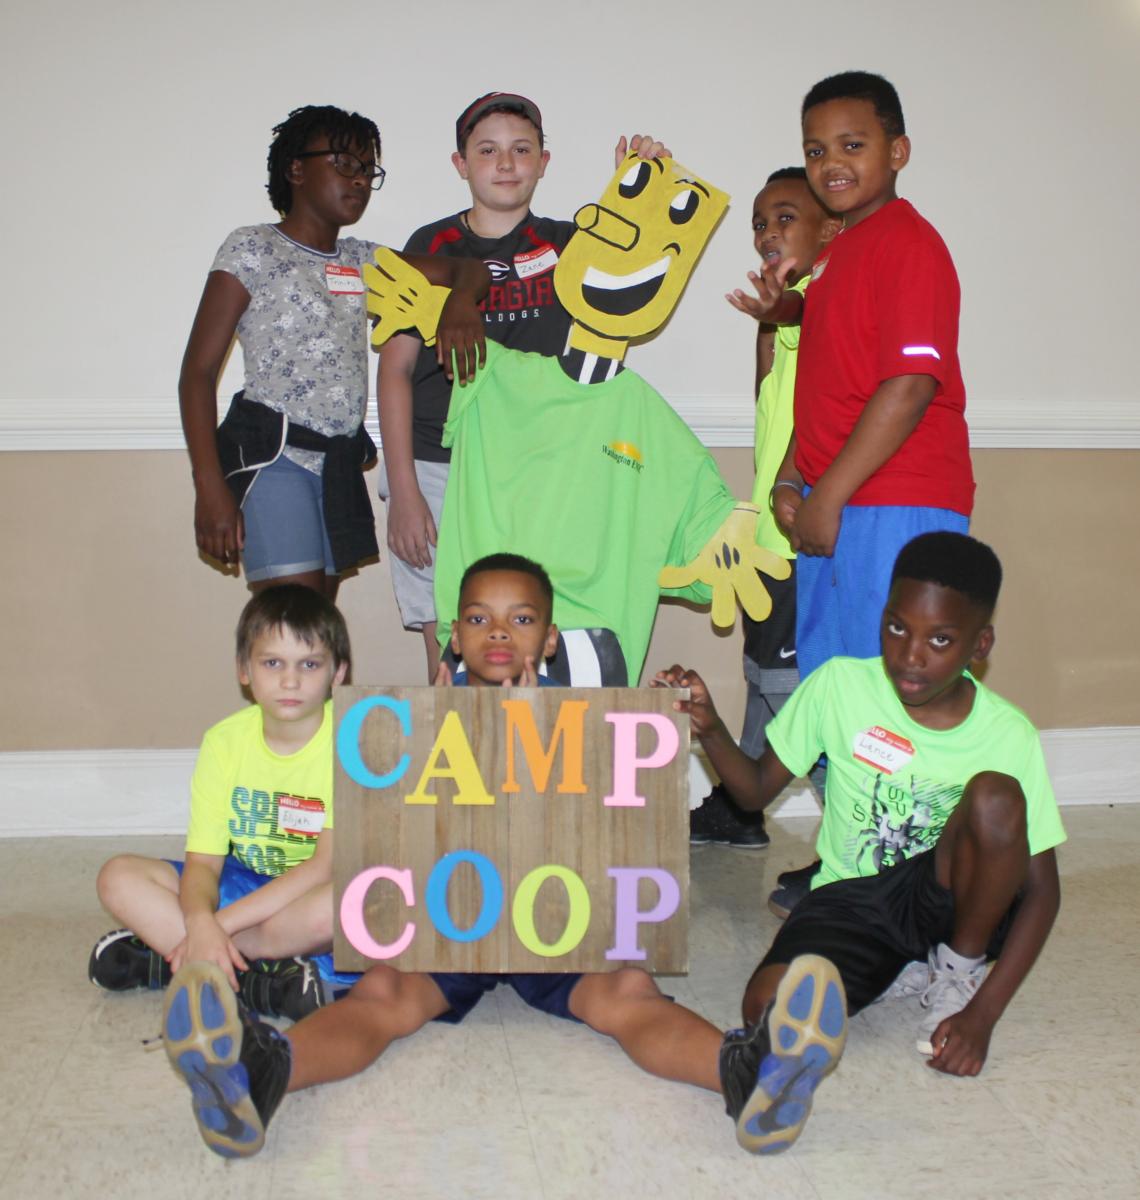 Children at Camp Co-0p 2018